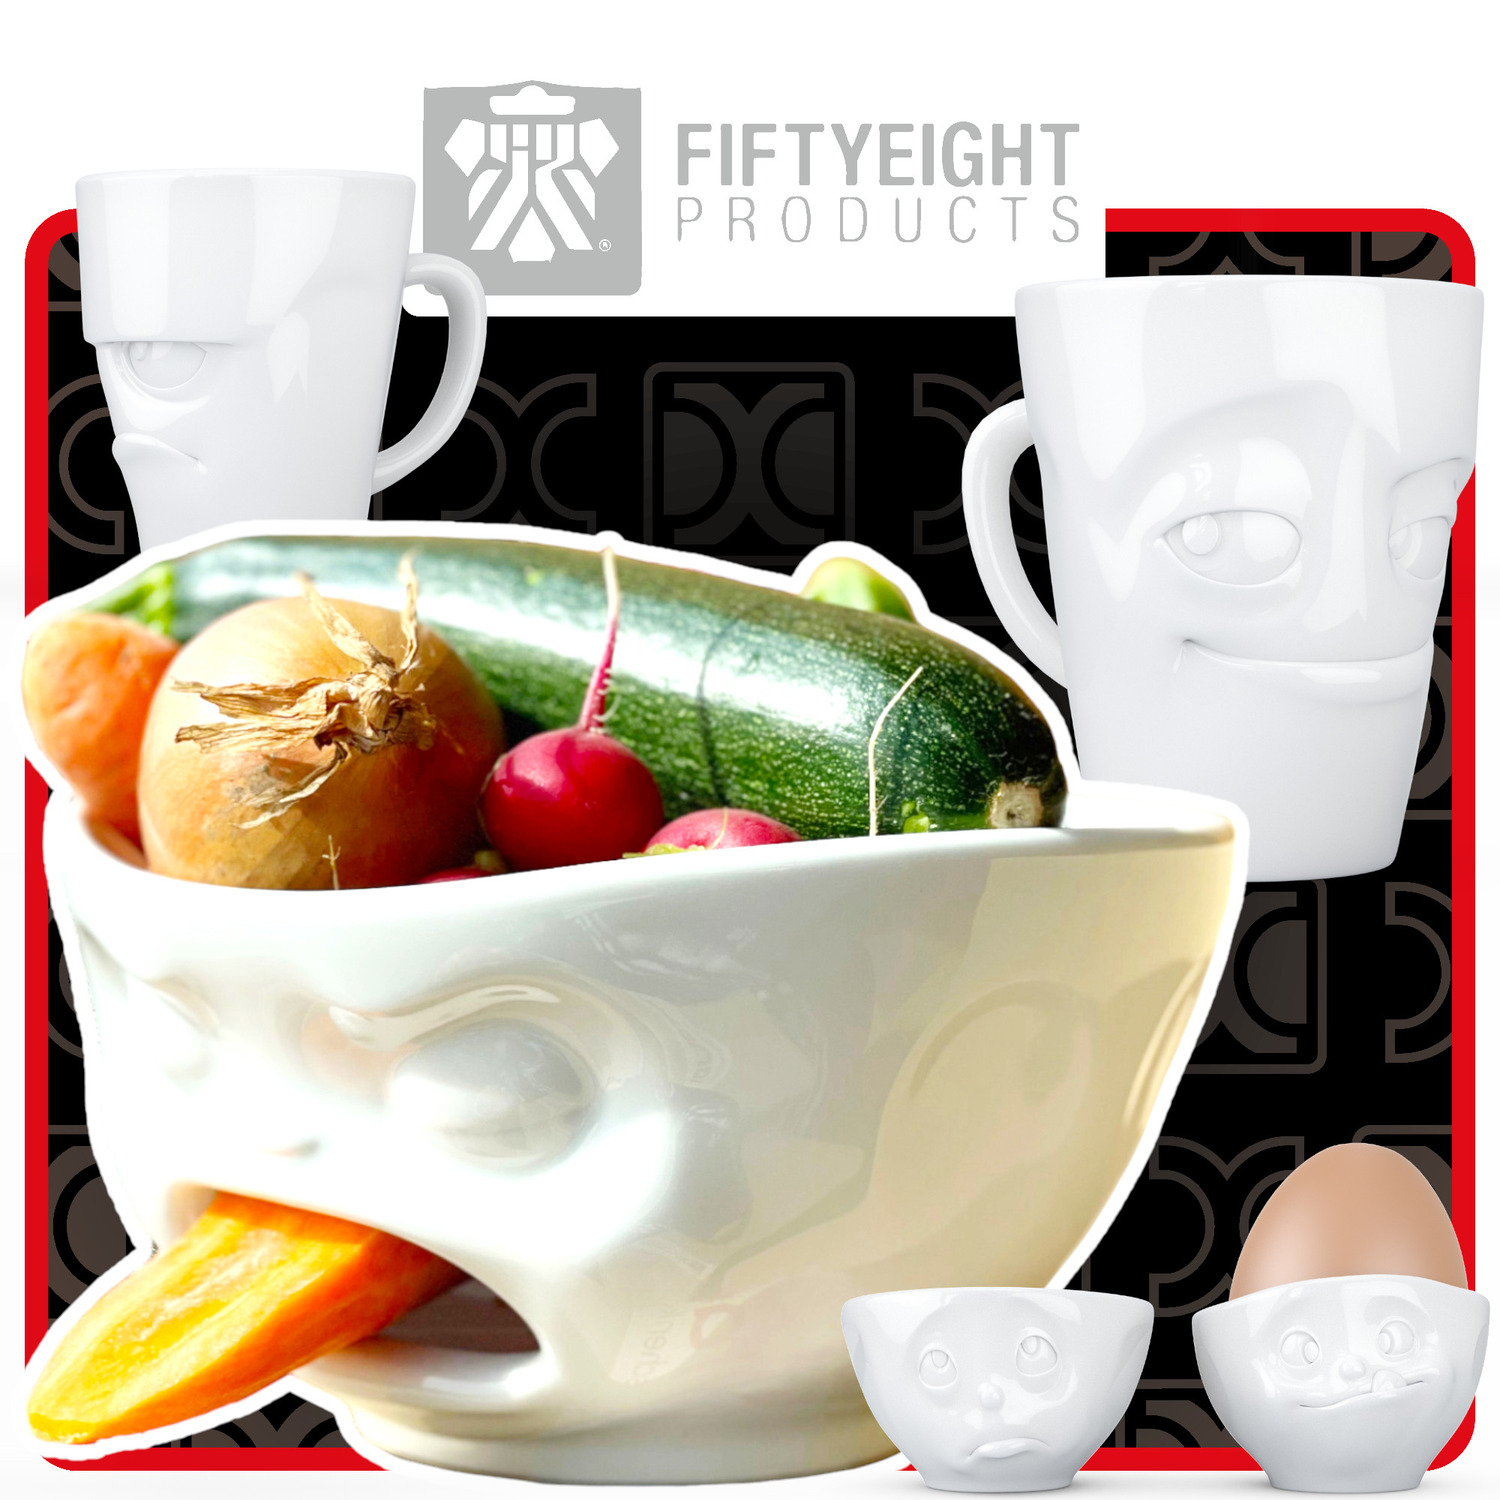 FIFTYEIGHT PRODUCTS